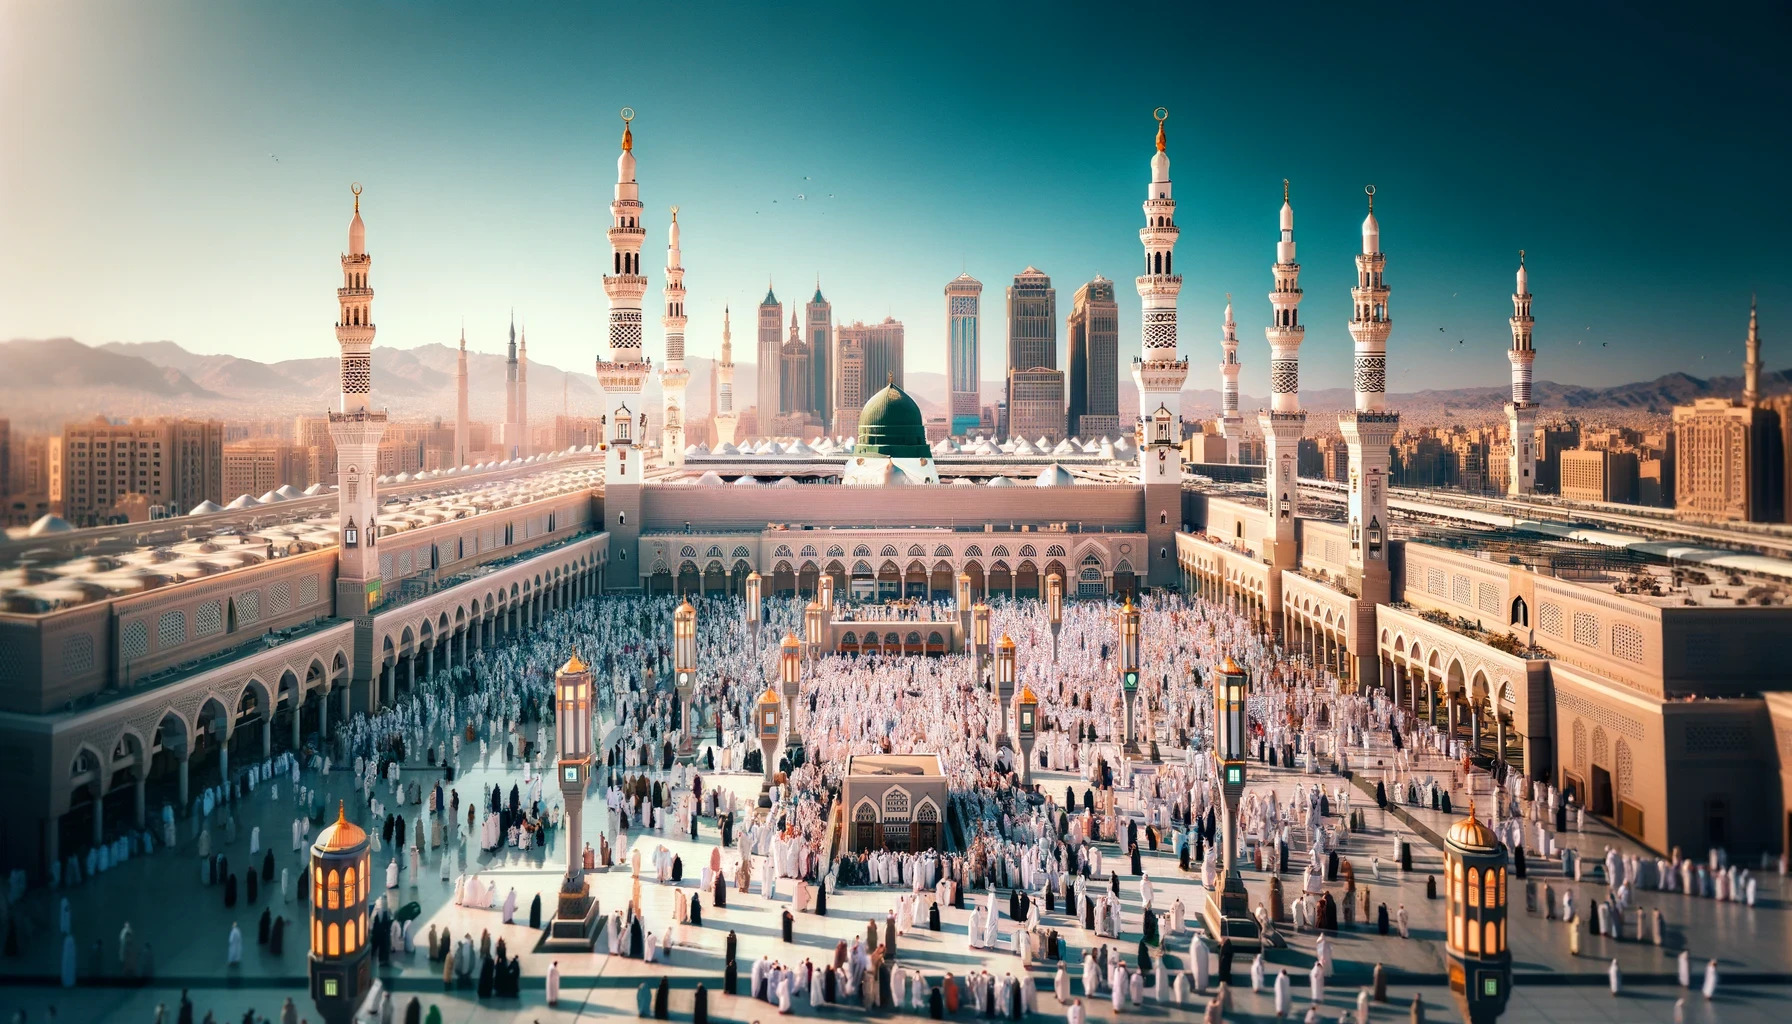 Serene view of Masjid an-Nabawi in Madinah, featuring its towering minarets and iconic green dome under a clear blue sky, with a harmonious blend of ancient and modern architecture surrounding the mosque.